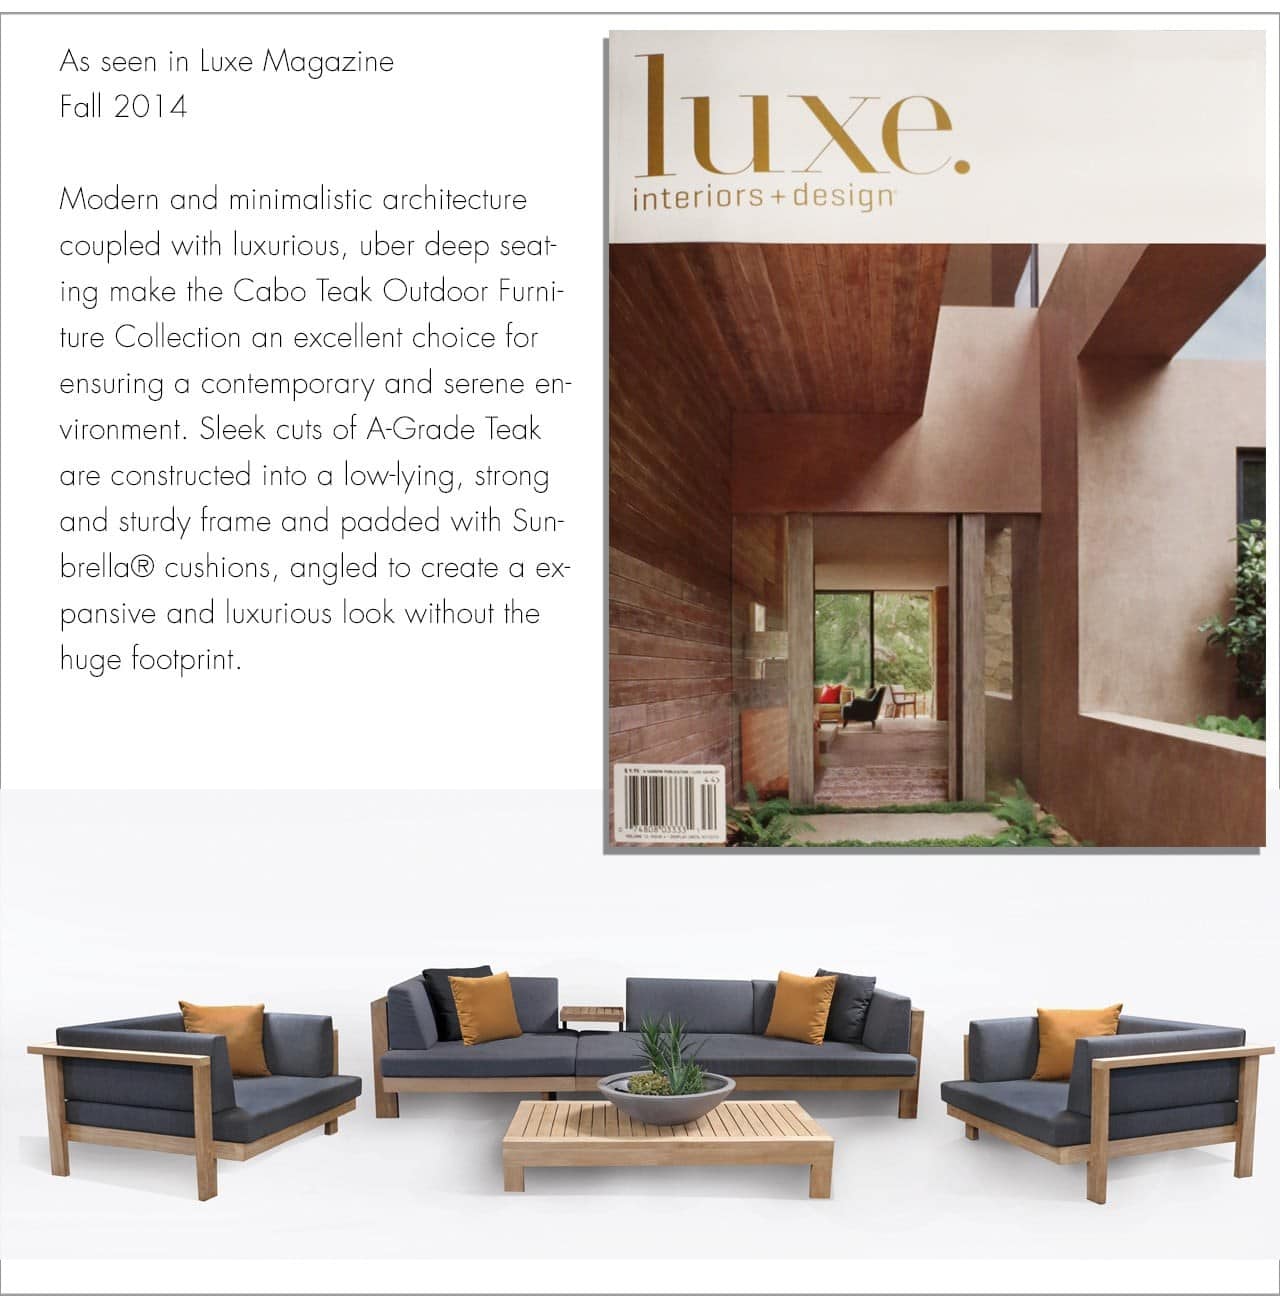 Cabo Teak Outdoor Furniture Collection as seen in Luxe Magazine Los Angeles